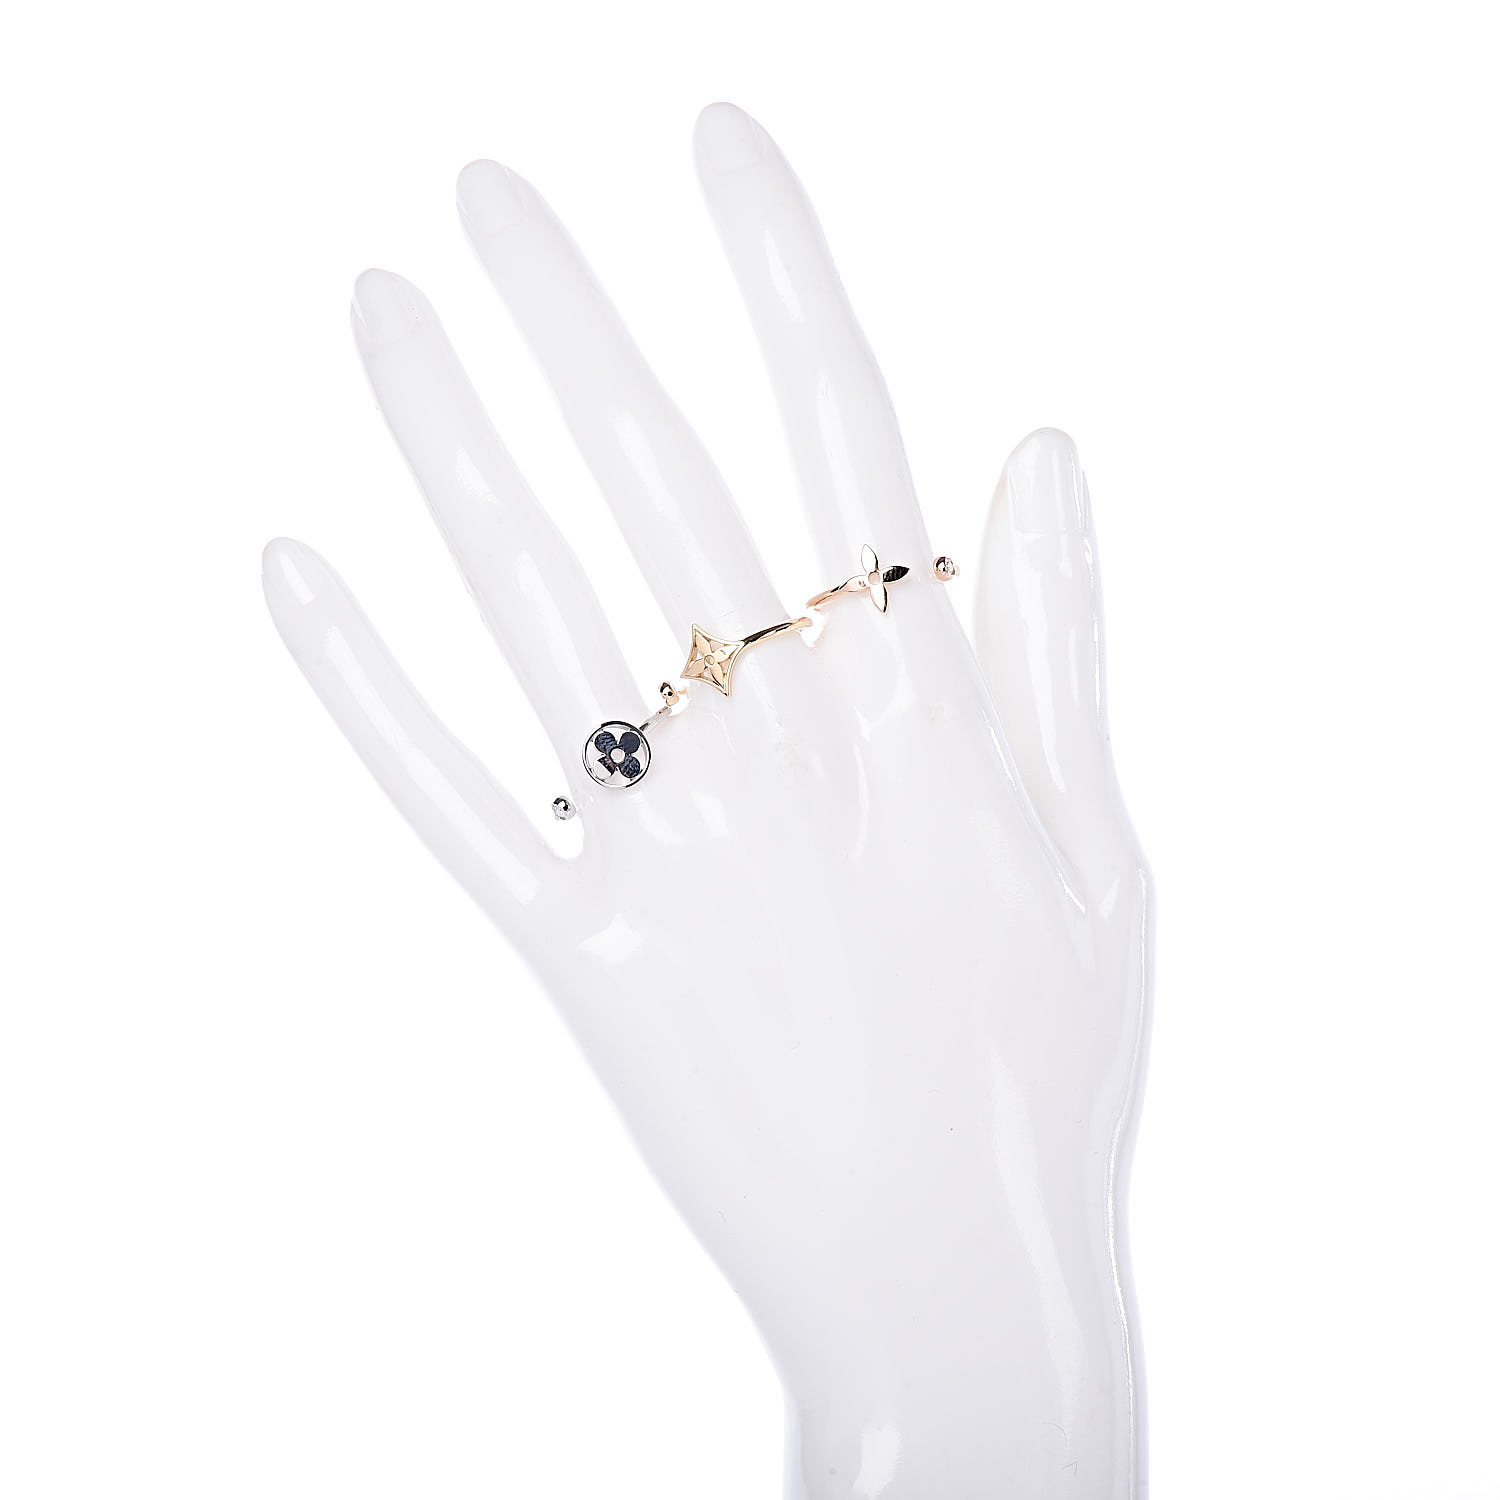 Idylle Blossom Two-Row Bracelet, Pink Gold and Diamonds - Categories Q95813